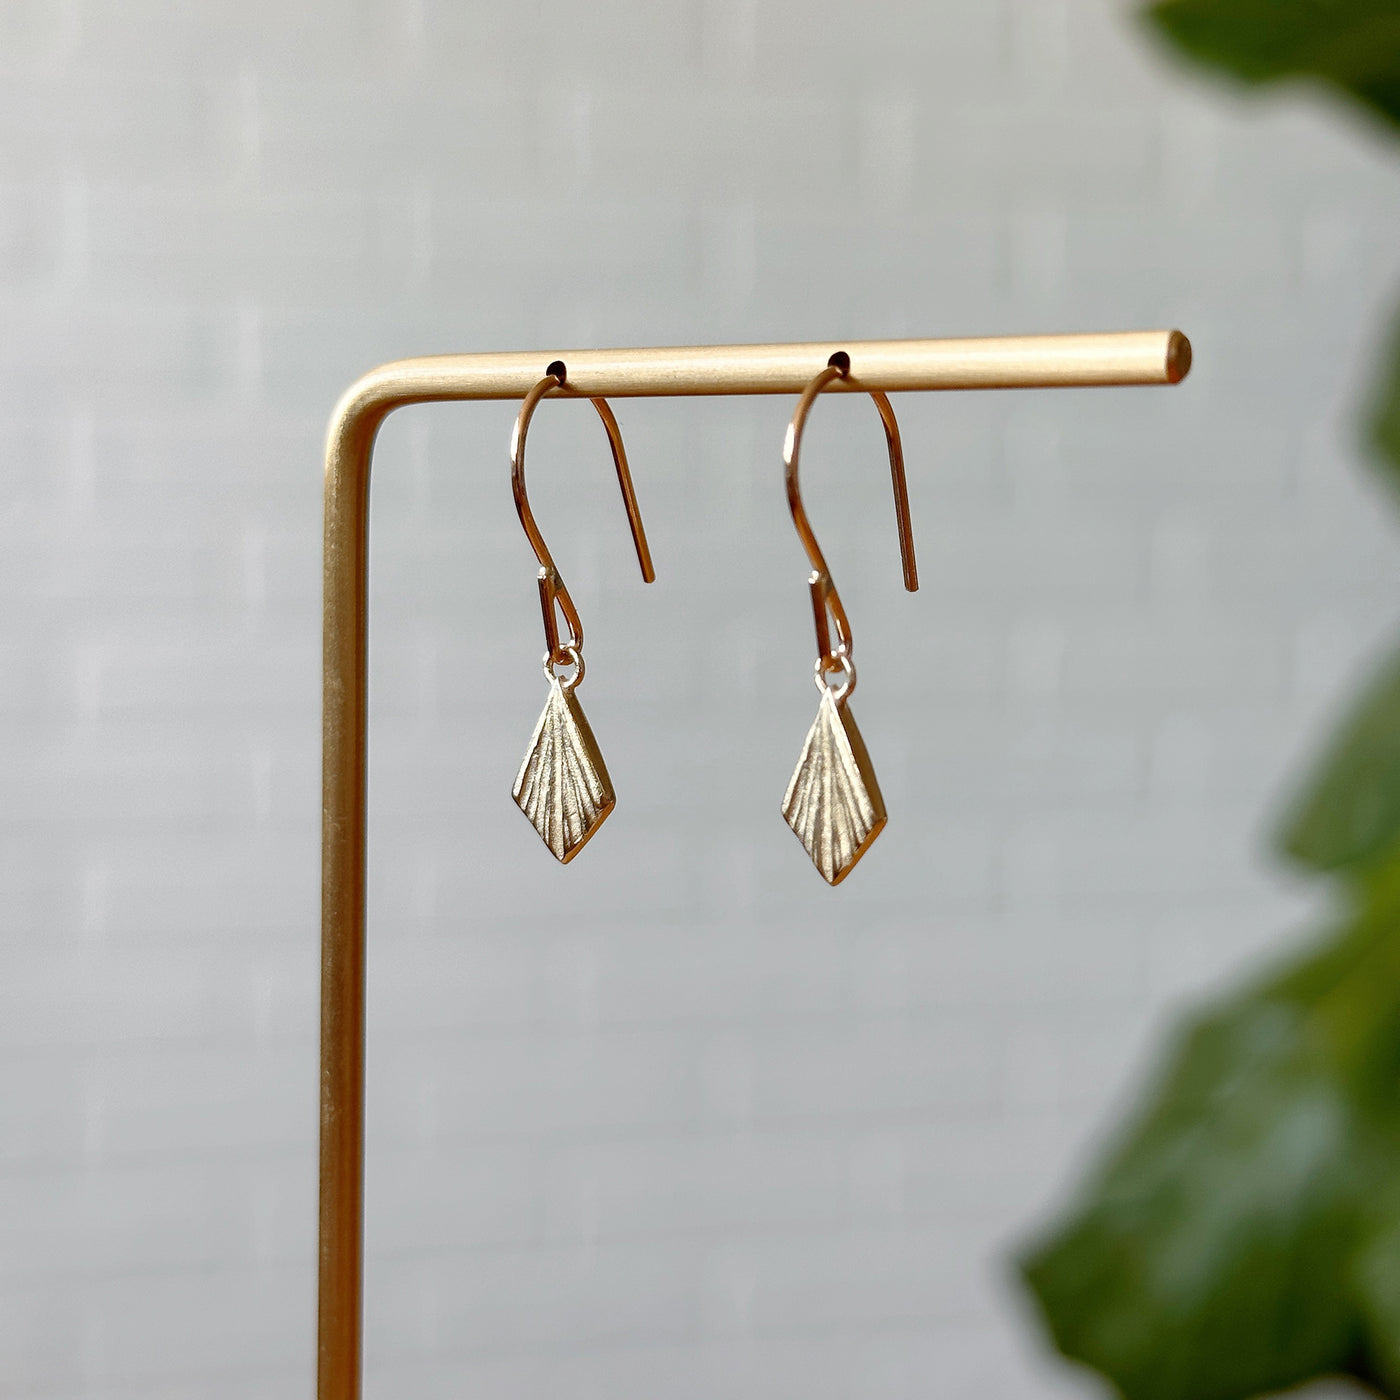 Flame Gold Dangle Earrings hanging in front of a white brick wall, side angle